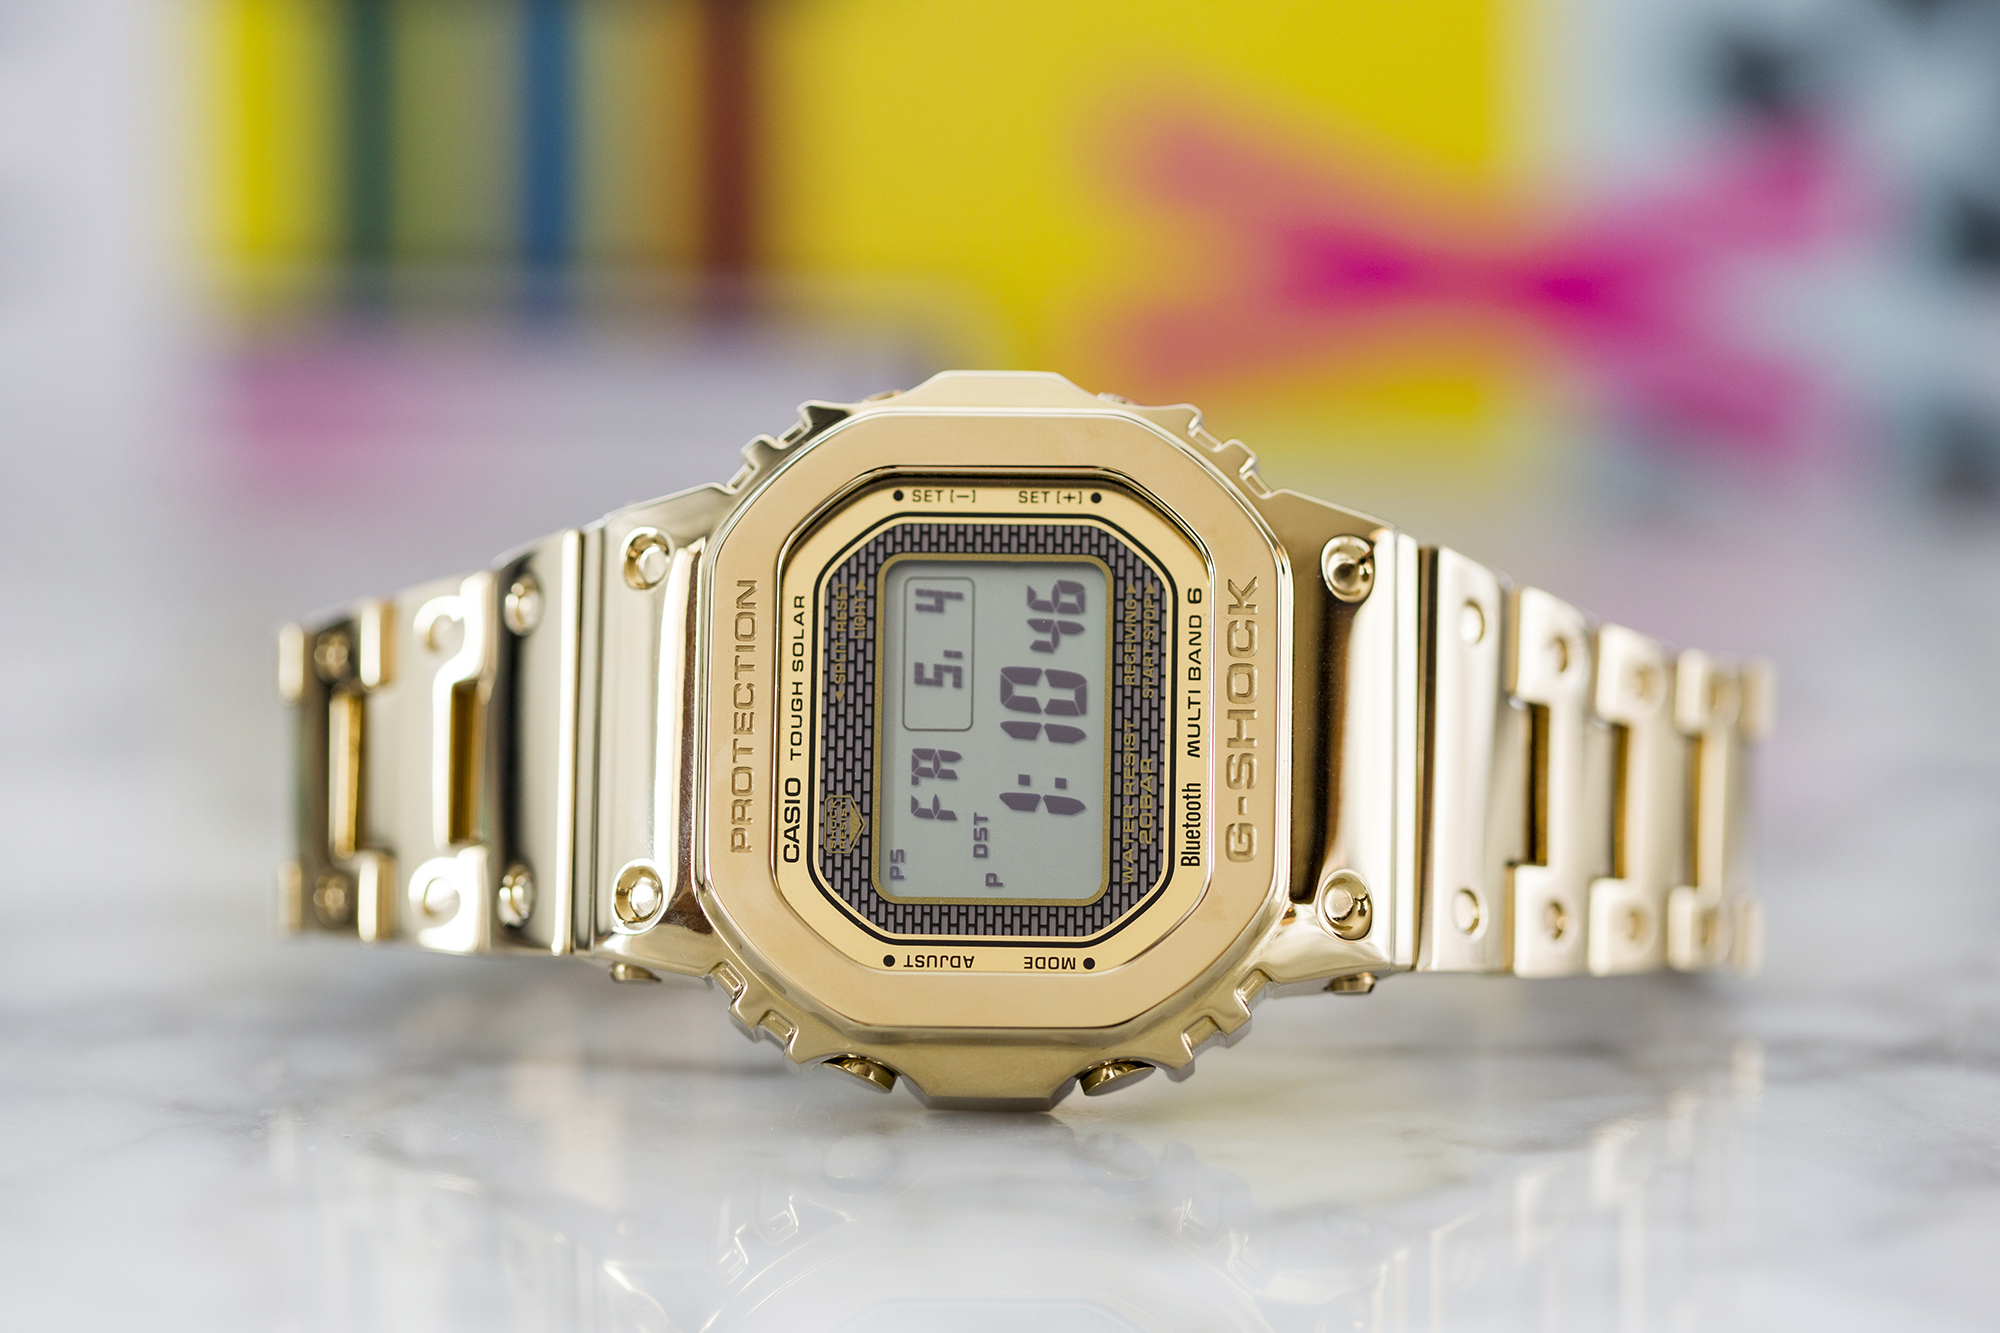 g shock black and gold bluetooth